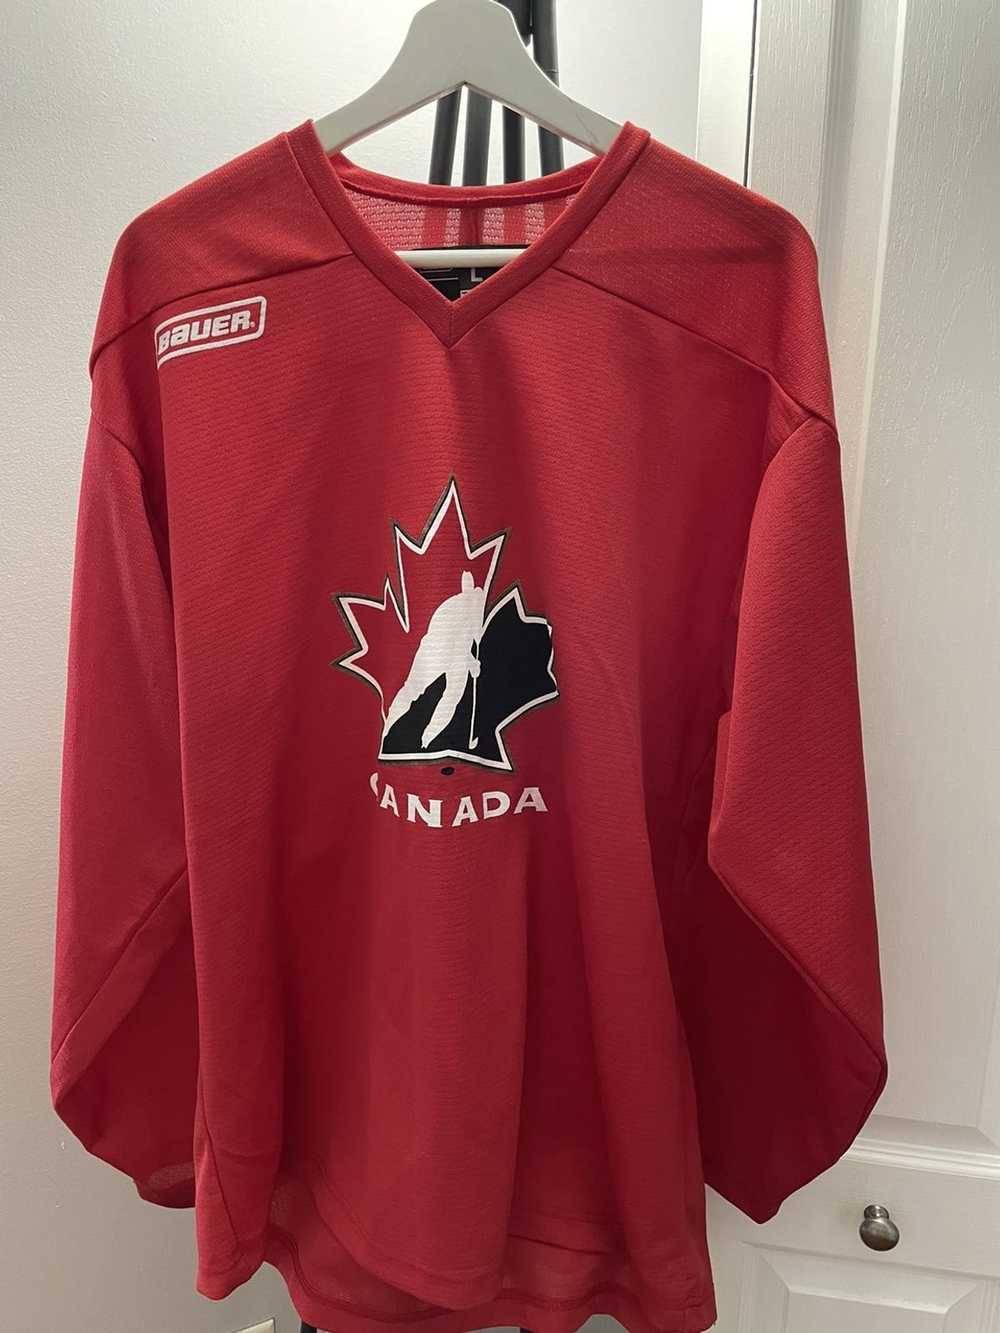 Nike Bauer Team Canada Hockey Jersey Home Red Long Sleeve Youth L